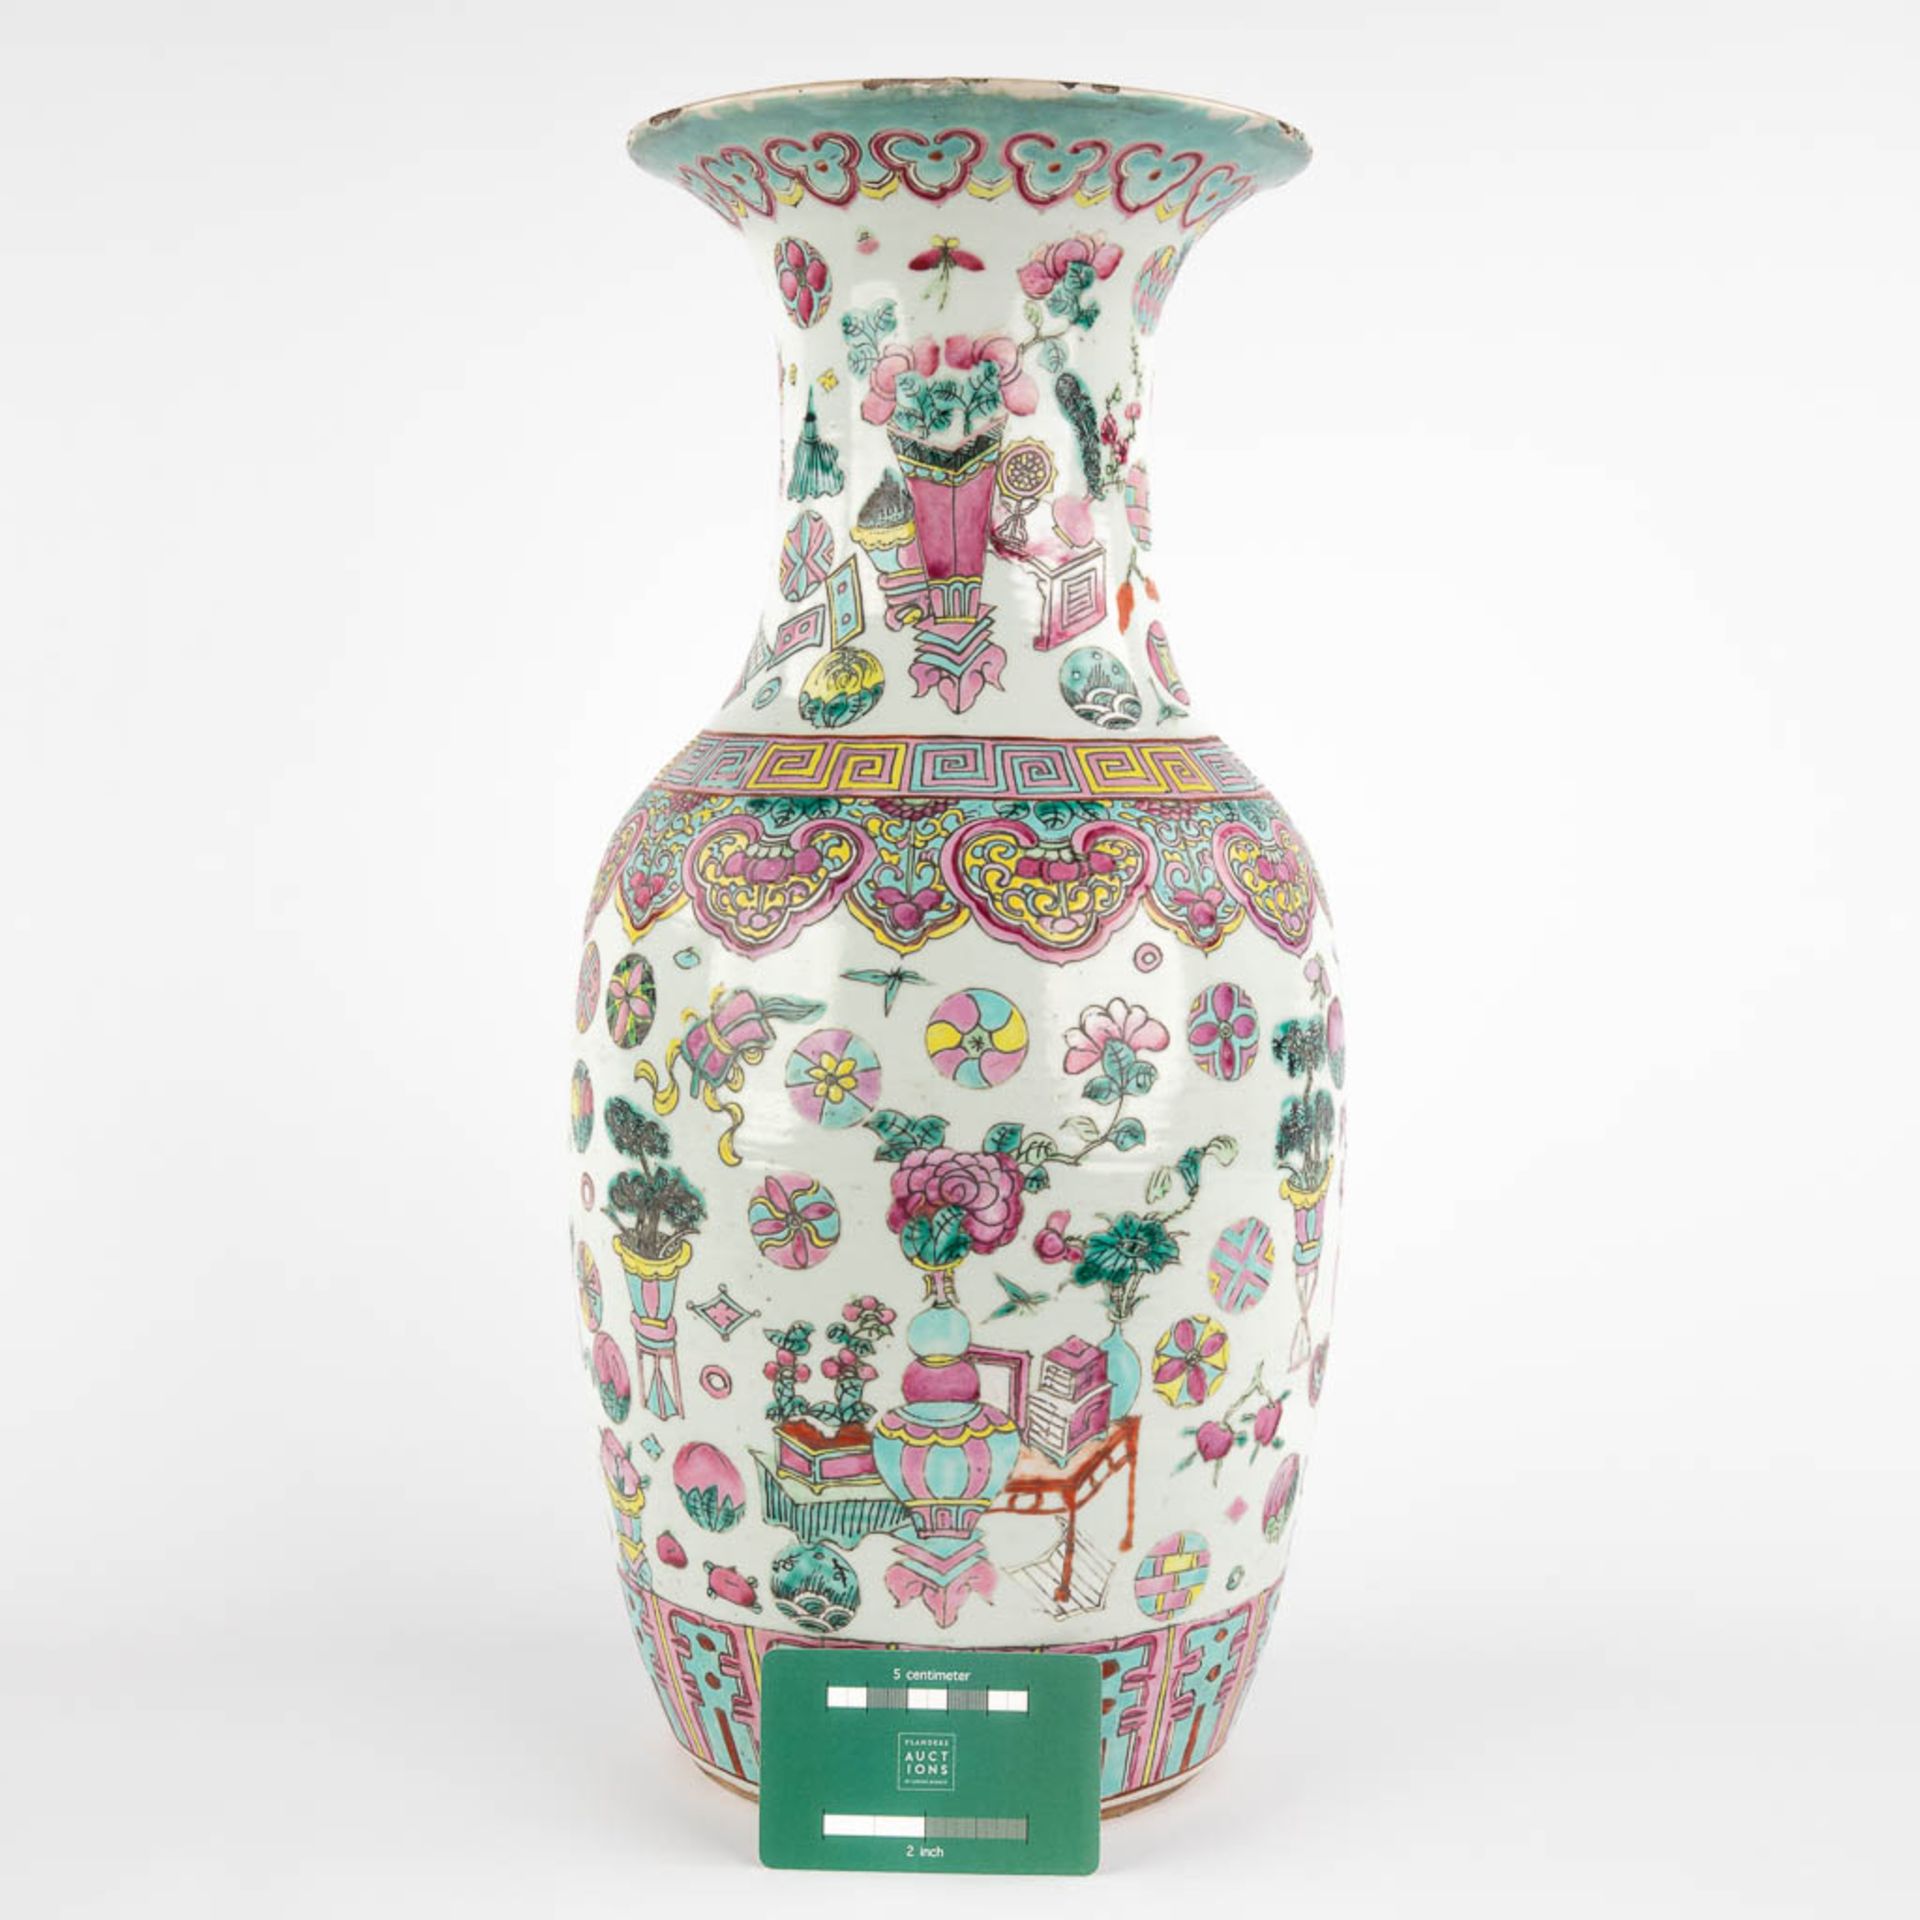 A Chinese vase with a decor of antiquities. 19th/20th C. (H:44 x D:21 cm) - Image 2 of 11